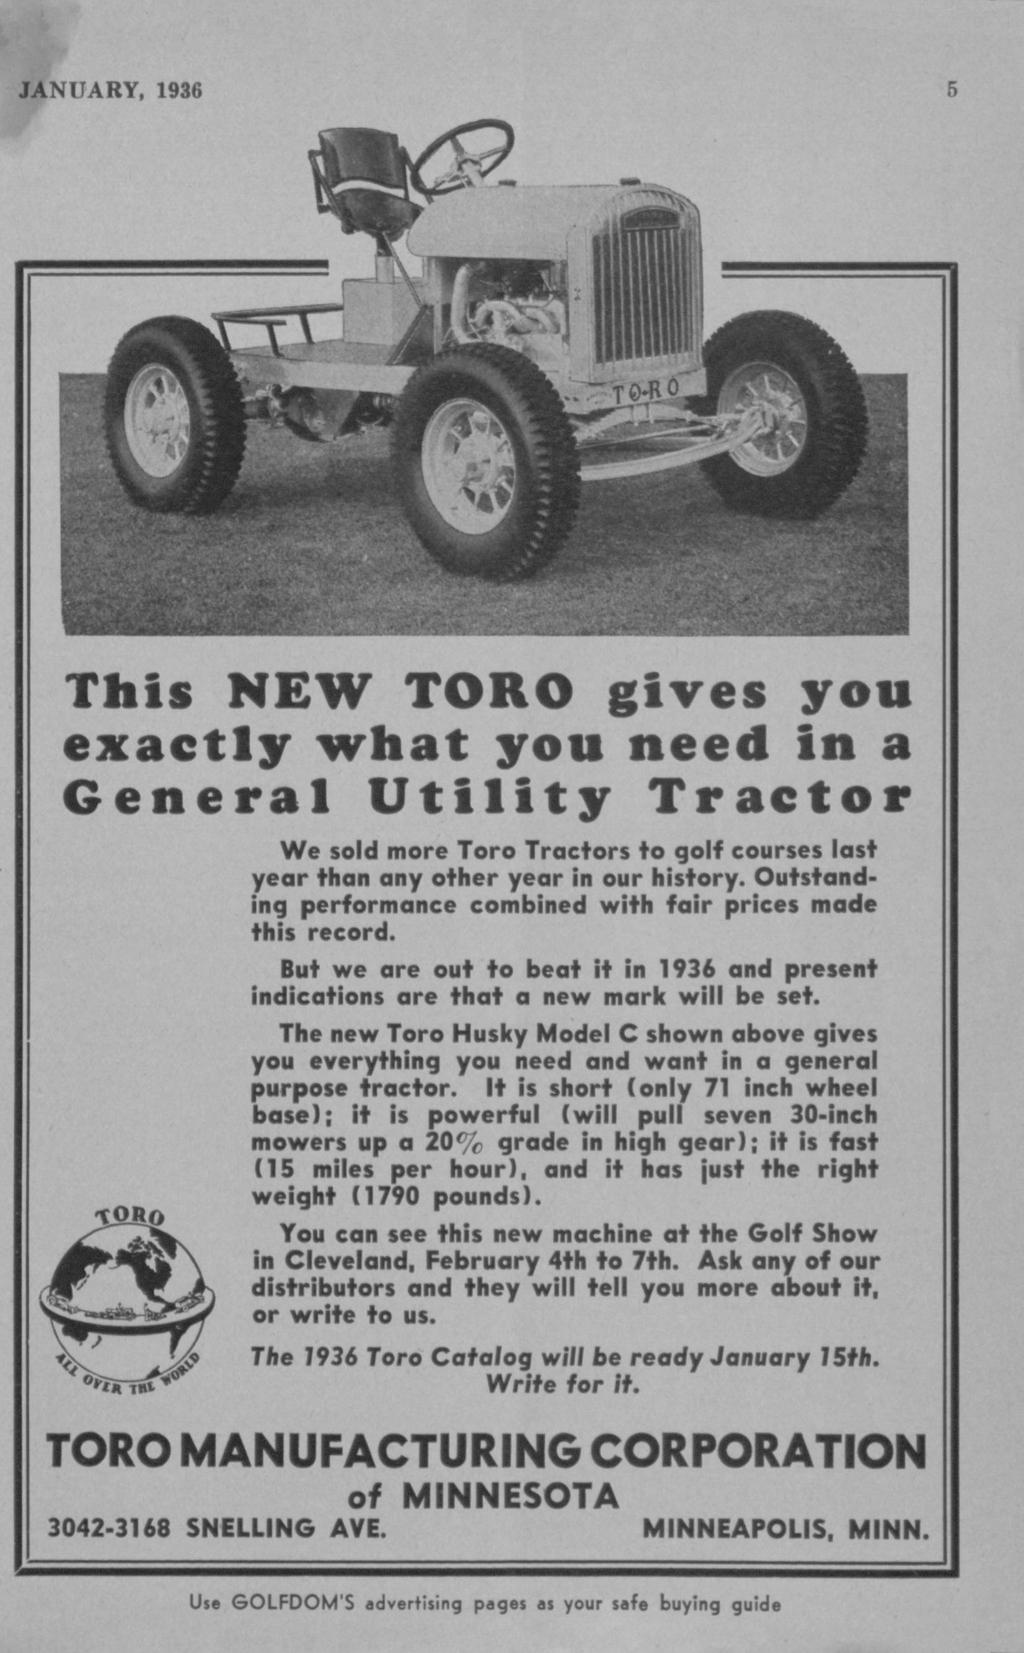 This NEW TORO gives you exactly what you need in a General Utility Tractor toro We sold more Toro Tractors to golf courses last year than any other year in our history.